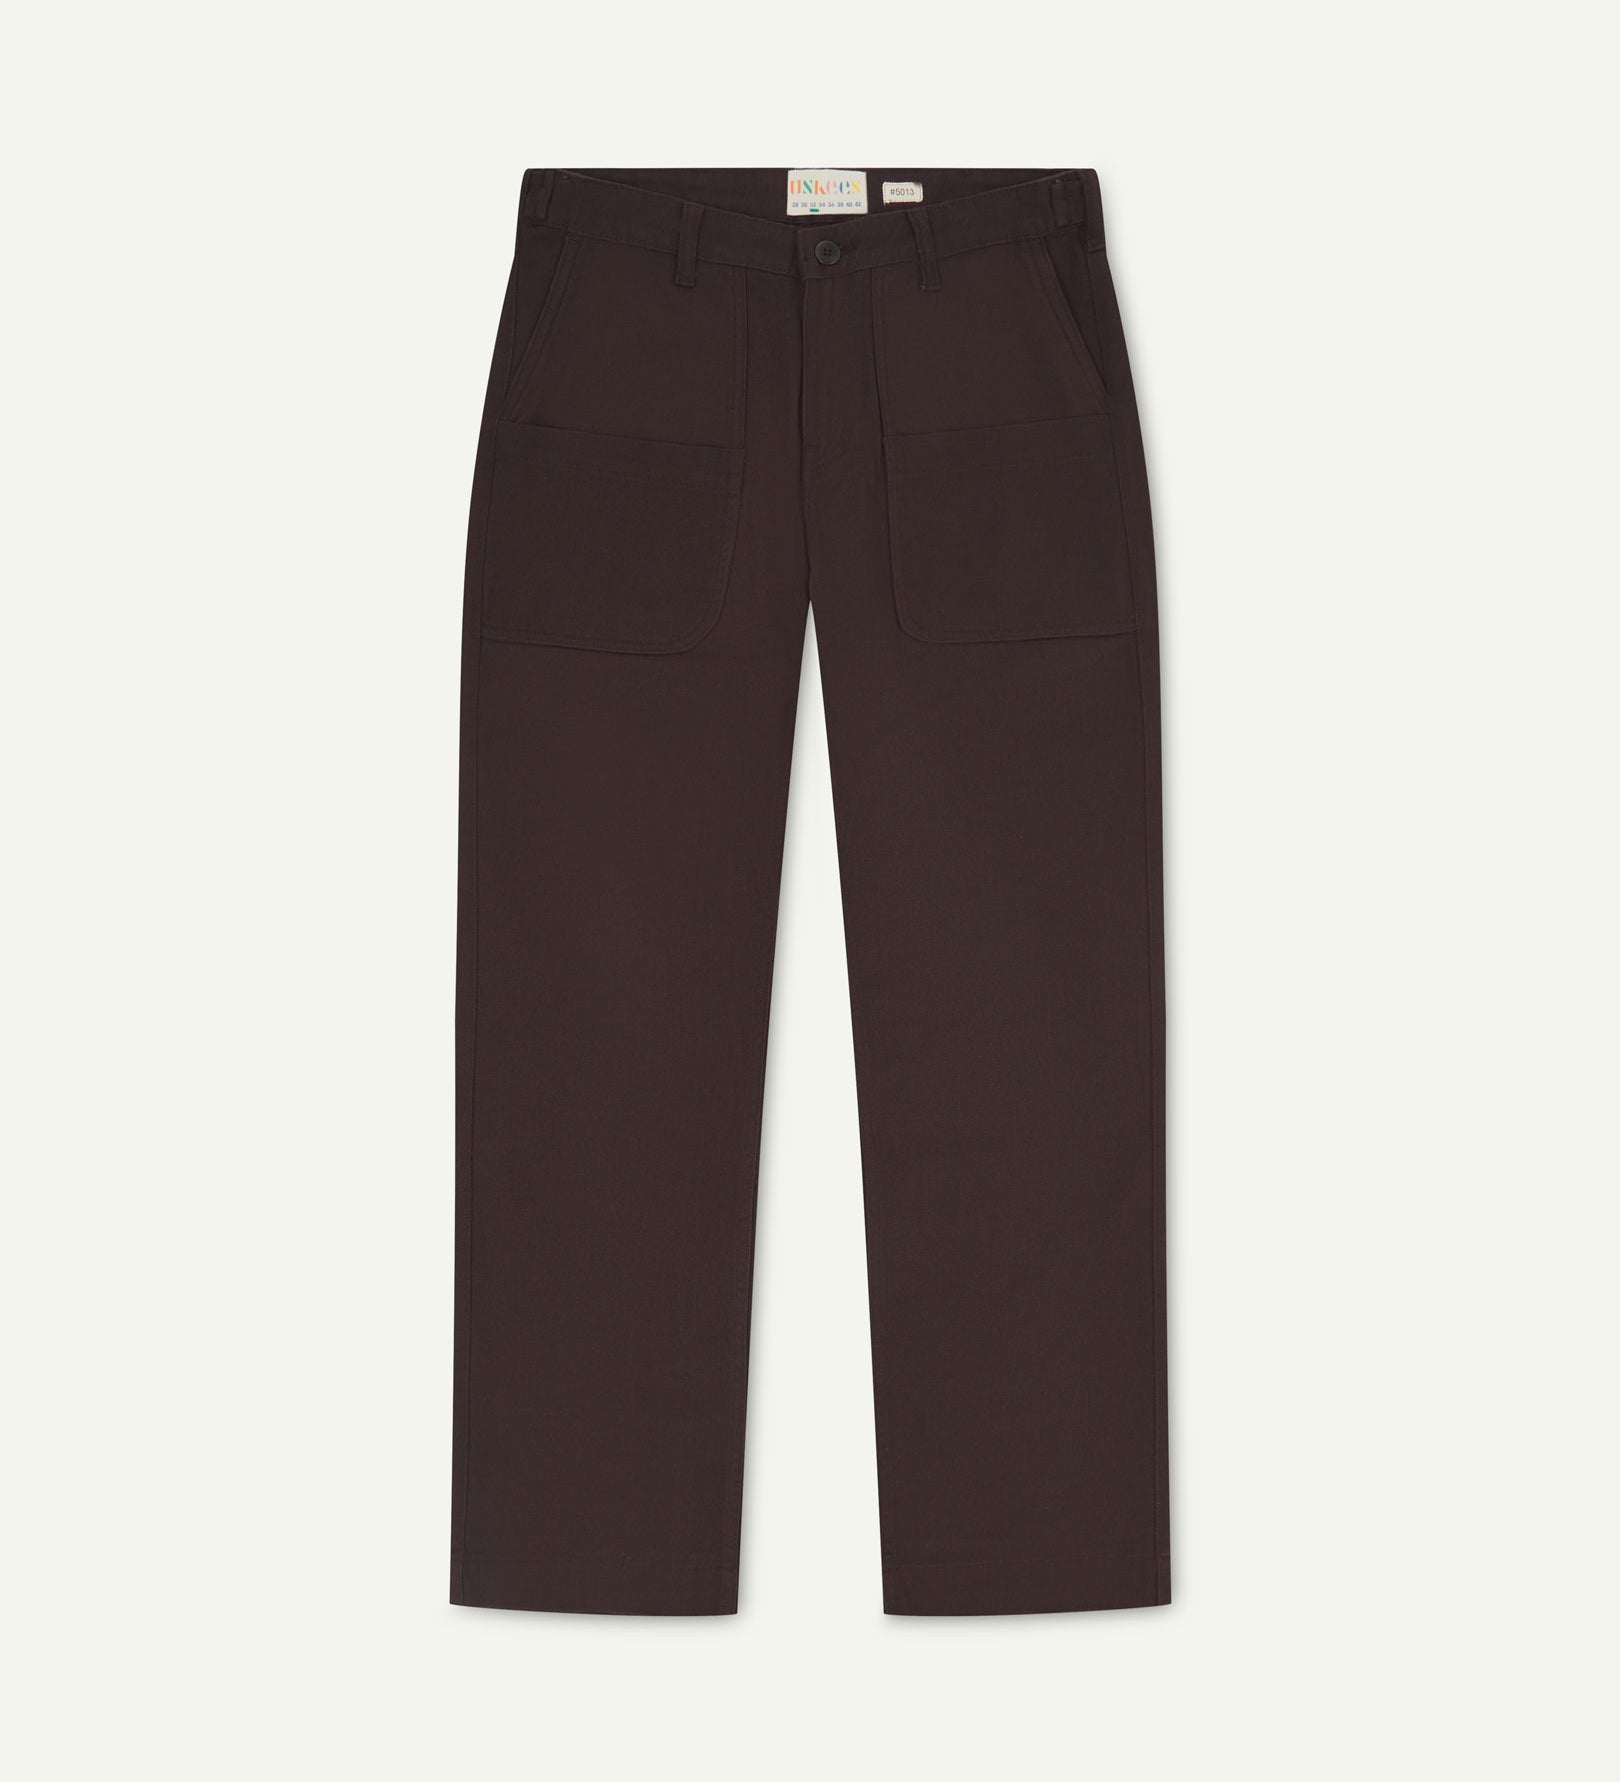 Front flat view of 5013 Uskees drill straight leg pants in brown-maroon, with focus on front pockets, layered pockets, belt loops and Uskees branding label.